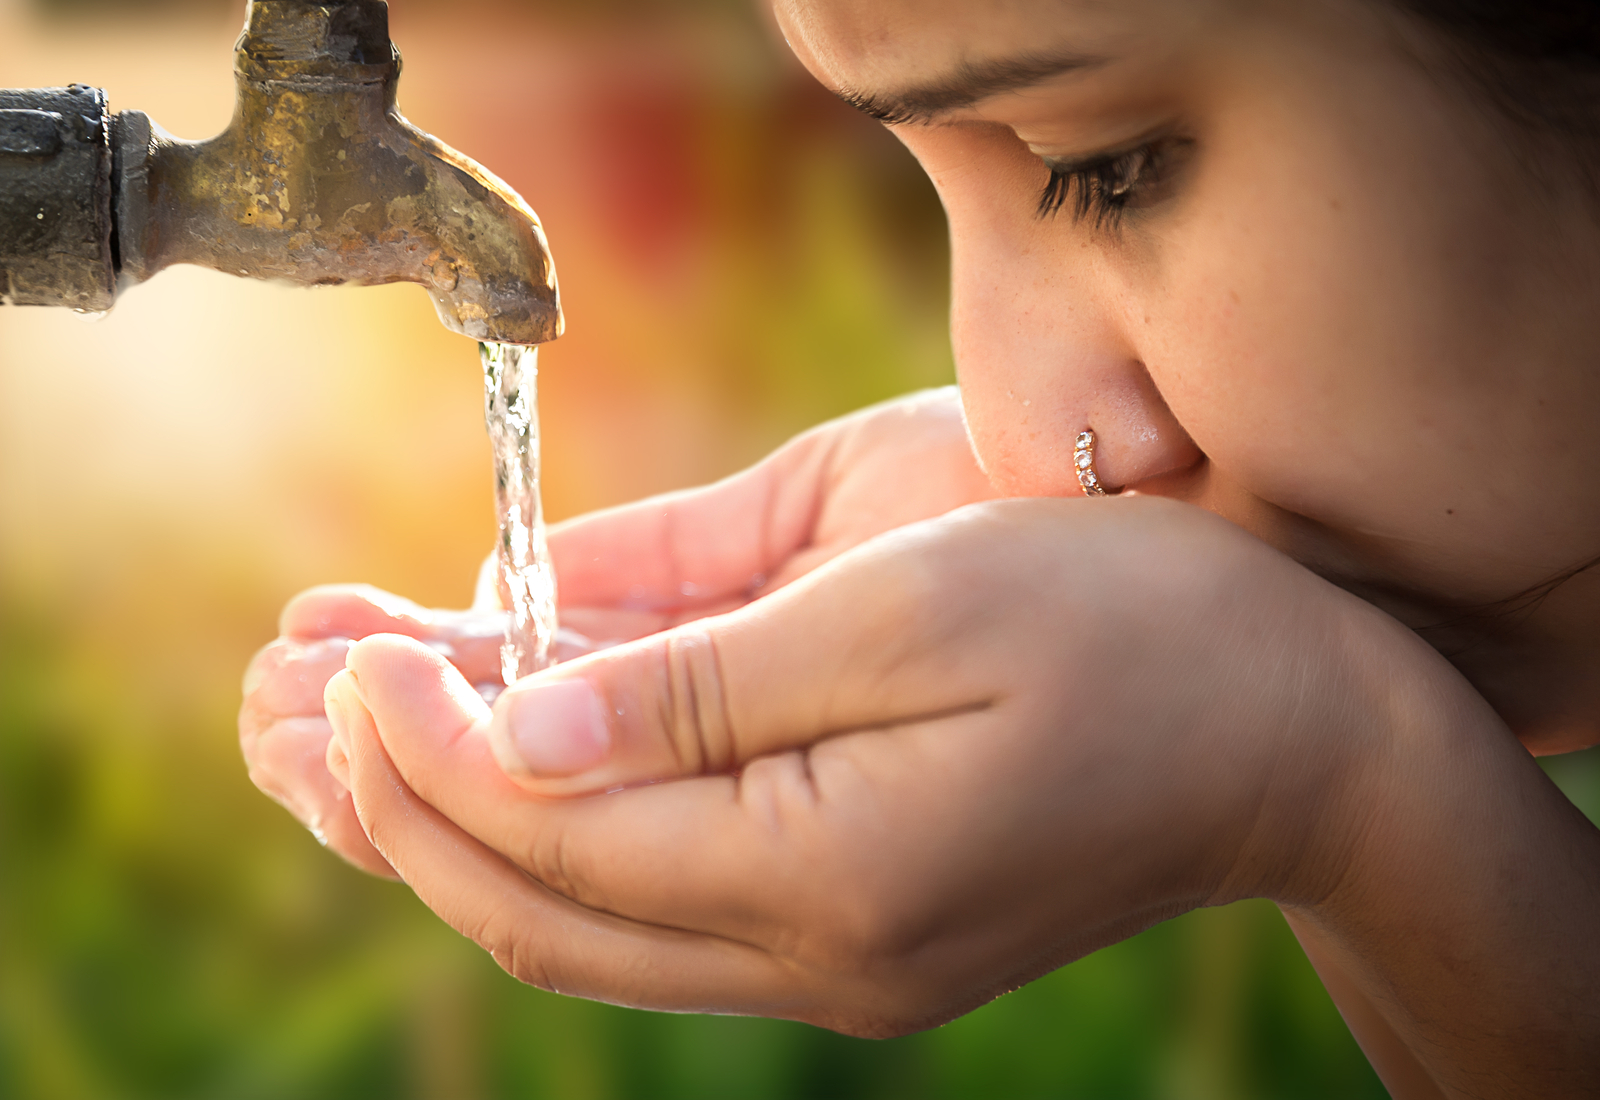 One in three people worldwide do not have access to fresh water. Photo by Shutterstock